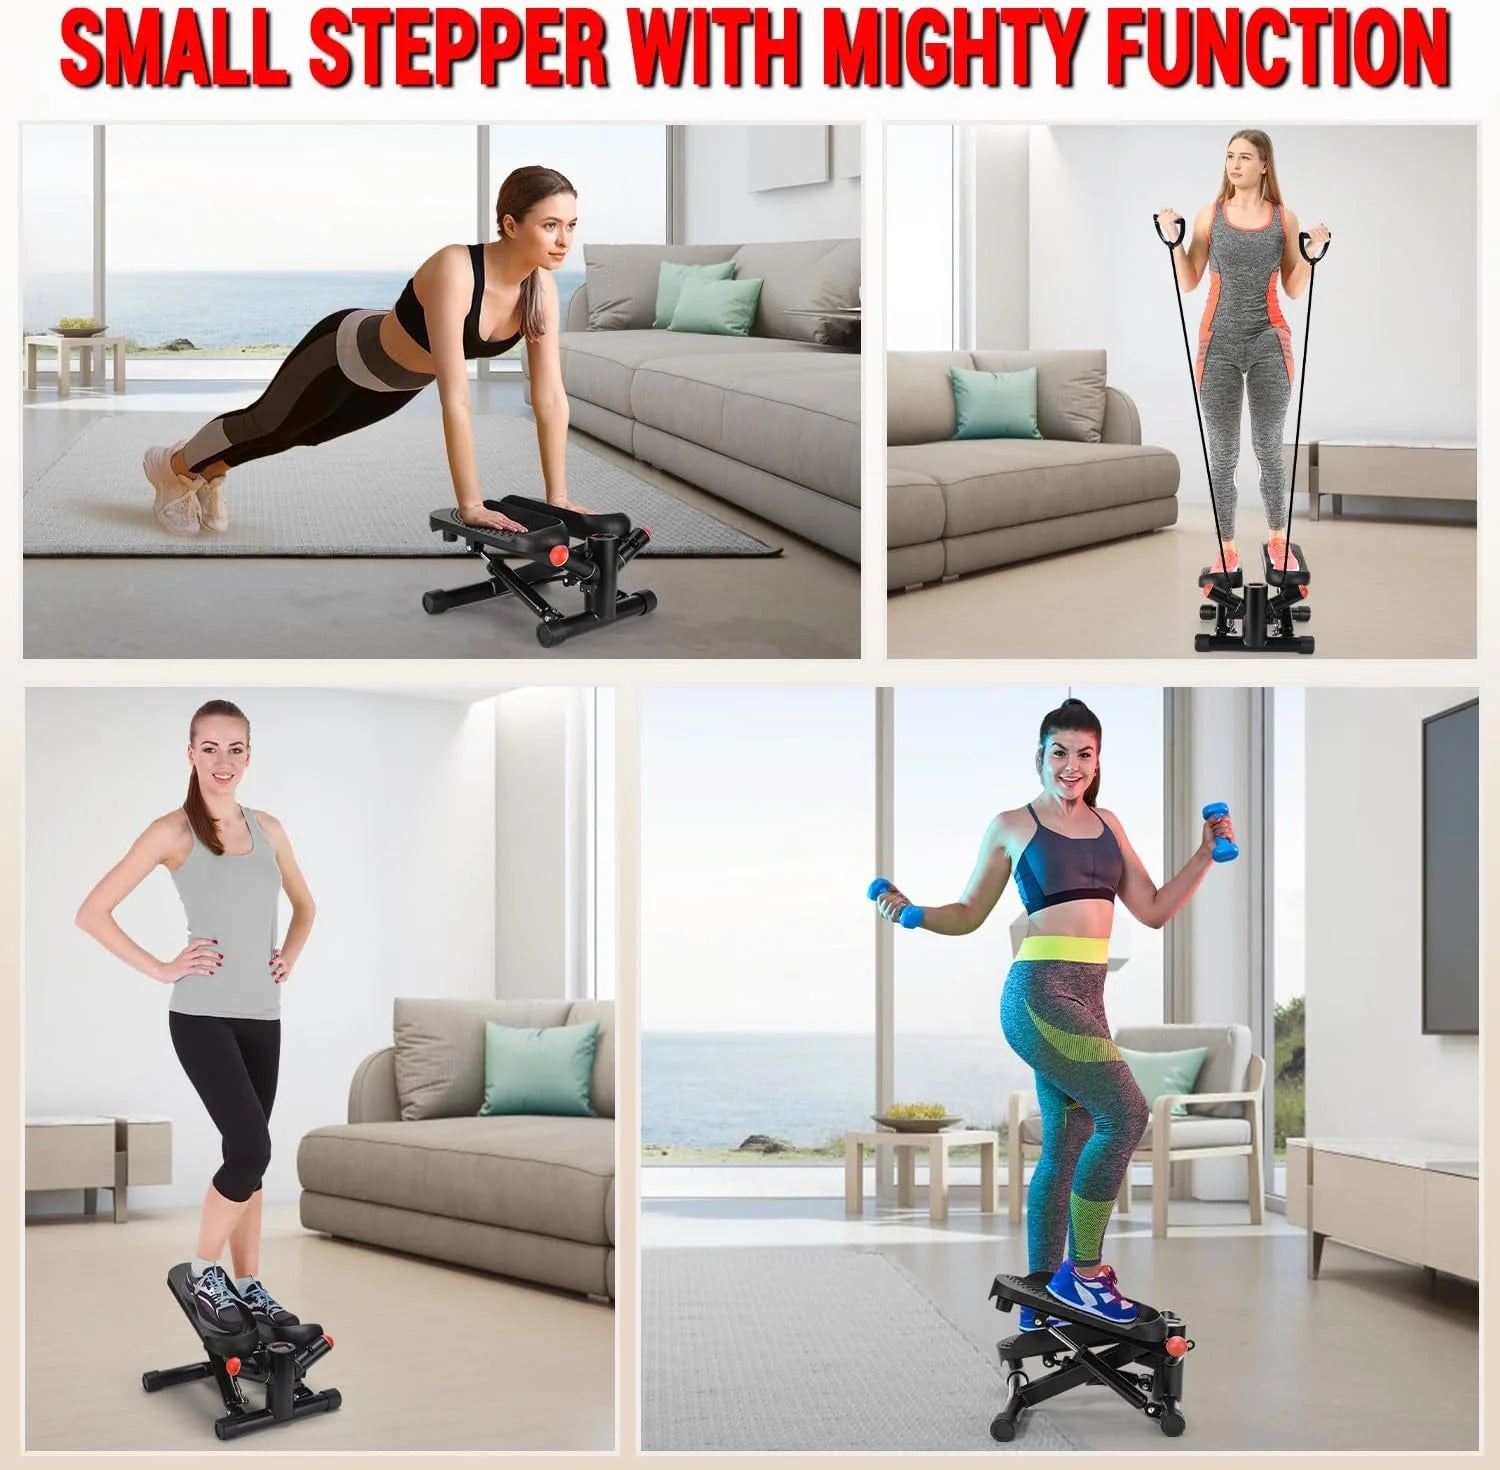 ACFITI Mini Steppers for Exercise at Home, Stair Steppers Machine with Super Quiet Design, Hydraulic Twist Stepper with Resistance Bands,Portable Home Exercise Equipment,330Lbs Weight Capacity